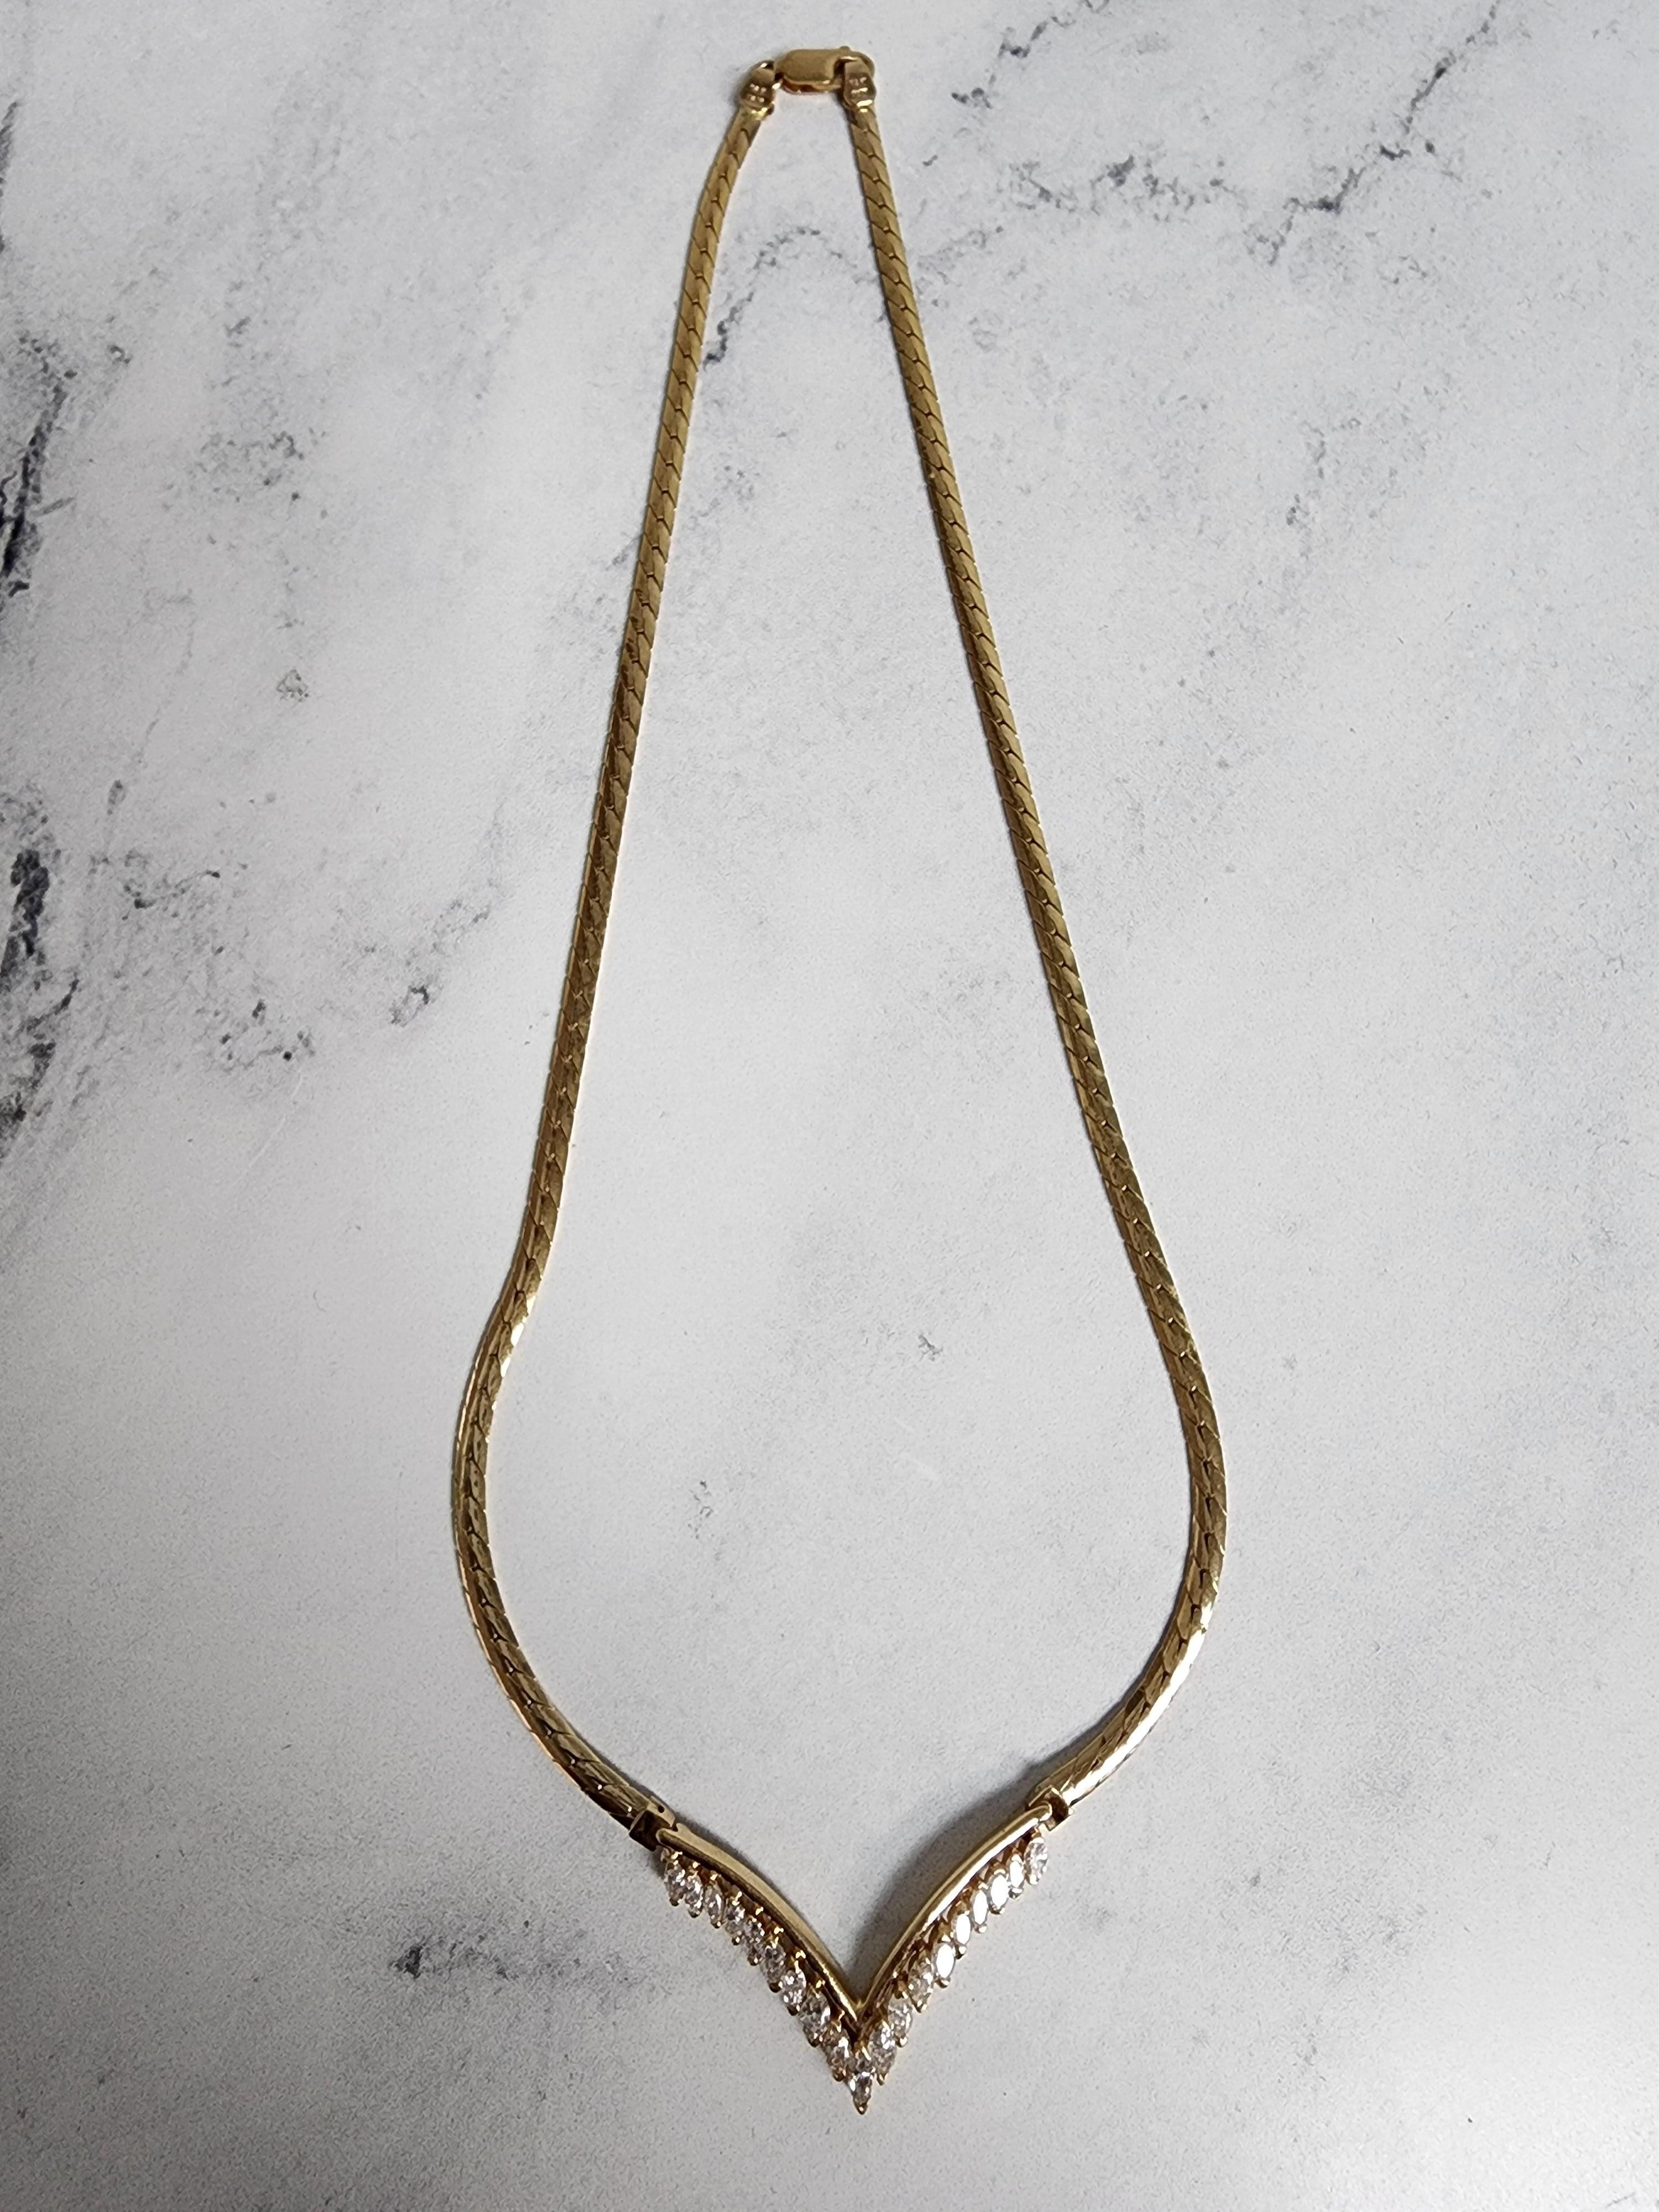 Marquise 'V' Shaped Diamond Necklace 1.75cttw 14k Yellow Gold In New Condition For Sale In Sugar Land, TX